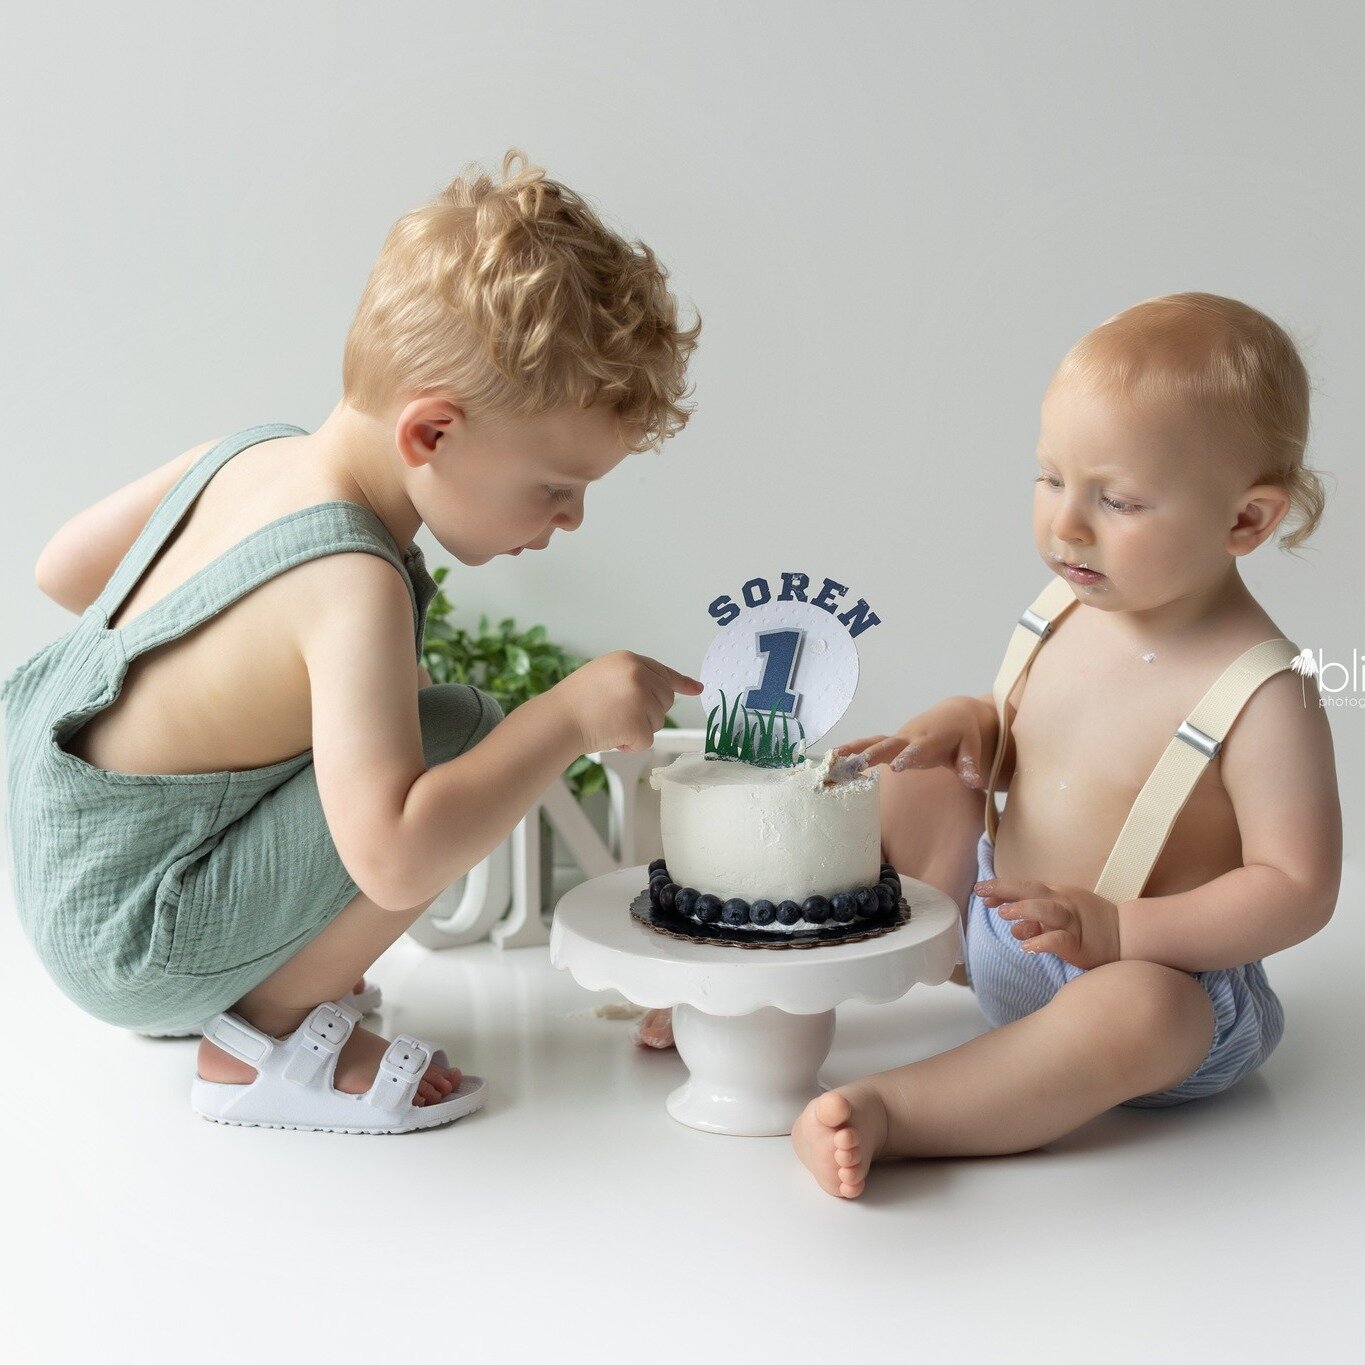 When Soren wasn't all that interested in the cake, I invited his big brother in to try it out. He was a much bigger fan of it! 

#cakesmash #siblings #rochestermnphotographer